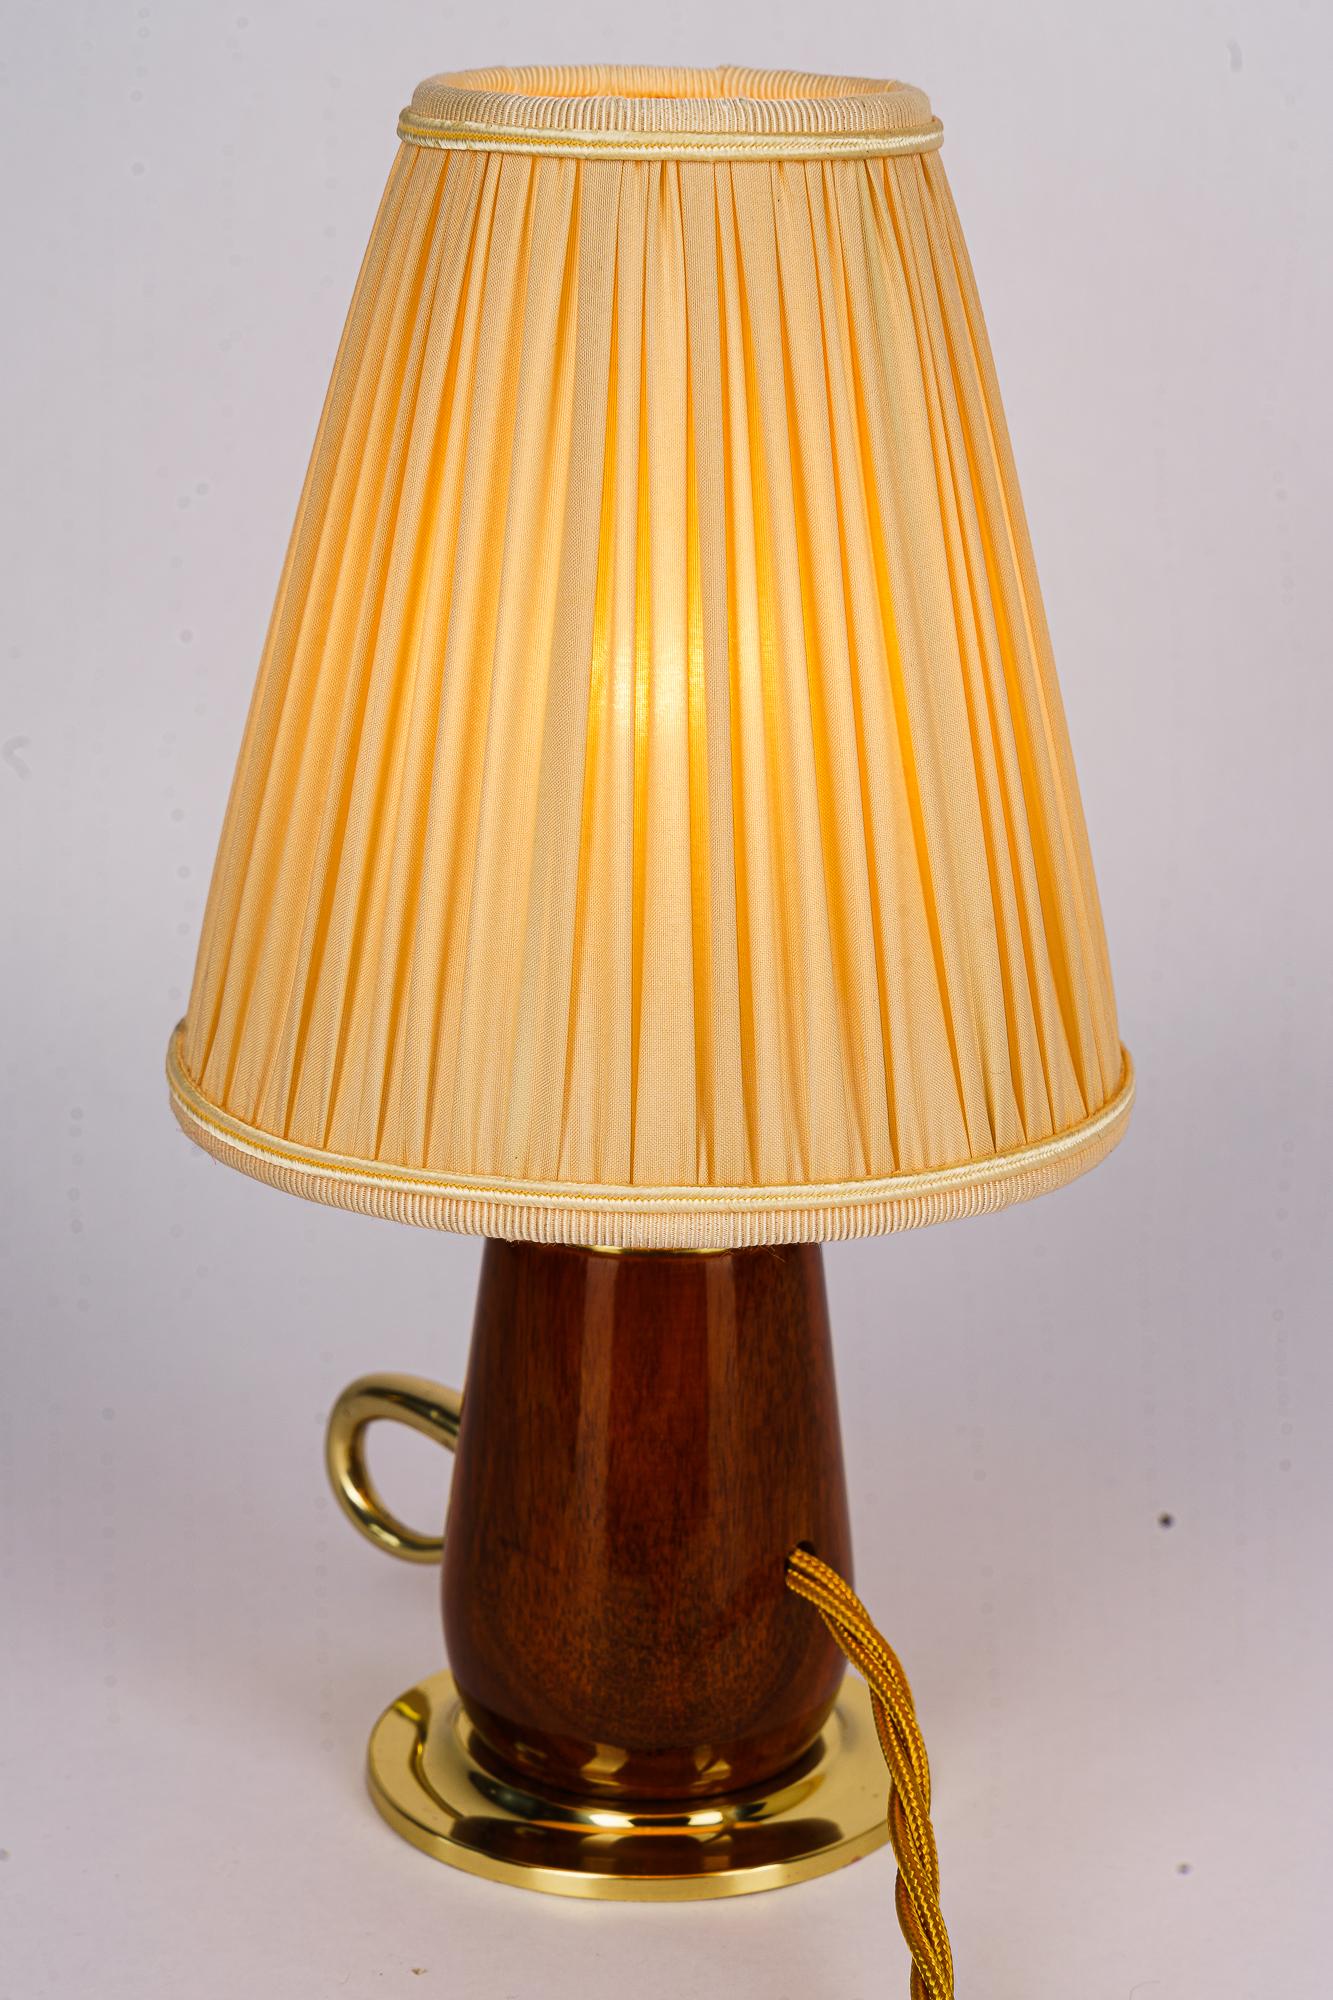 Rupert nikoll cherry wood table lamp with fabric shade vienna around 1950s For Sale 1